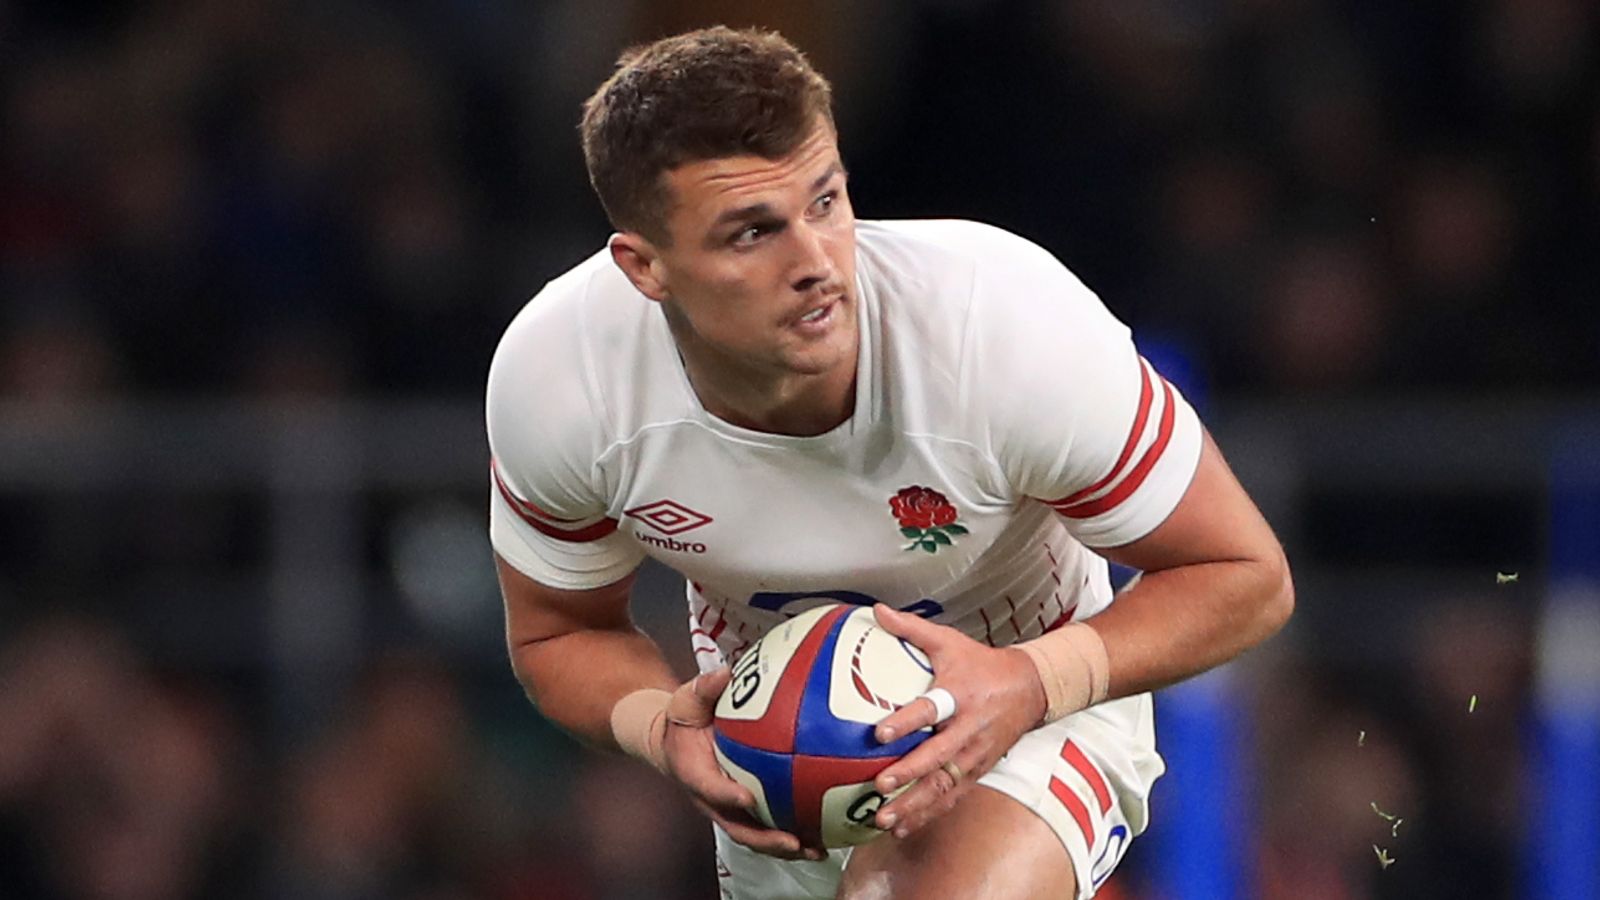 Henry Slade, Henry Arundell return to England’s Six Nations squad; Tom Curry still out, Courtney Lawes rehabbing